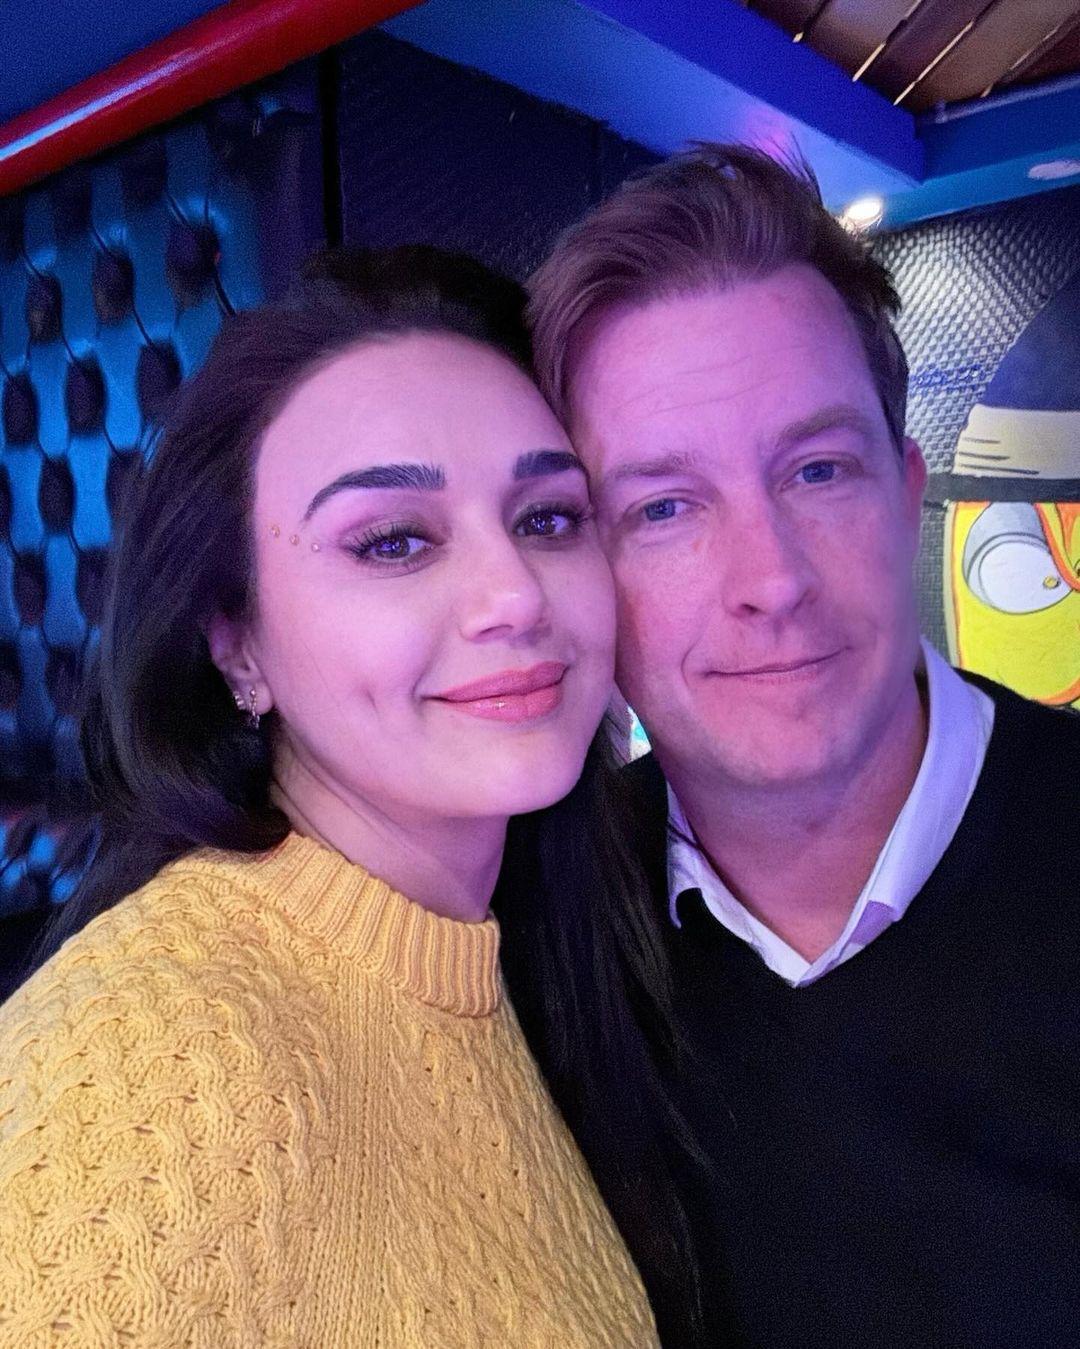 Among the pictures Preity posted, this one of her posing with Gene Goodenough is certainly perfect! The two look ever in love